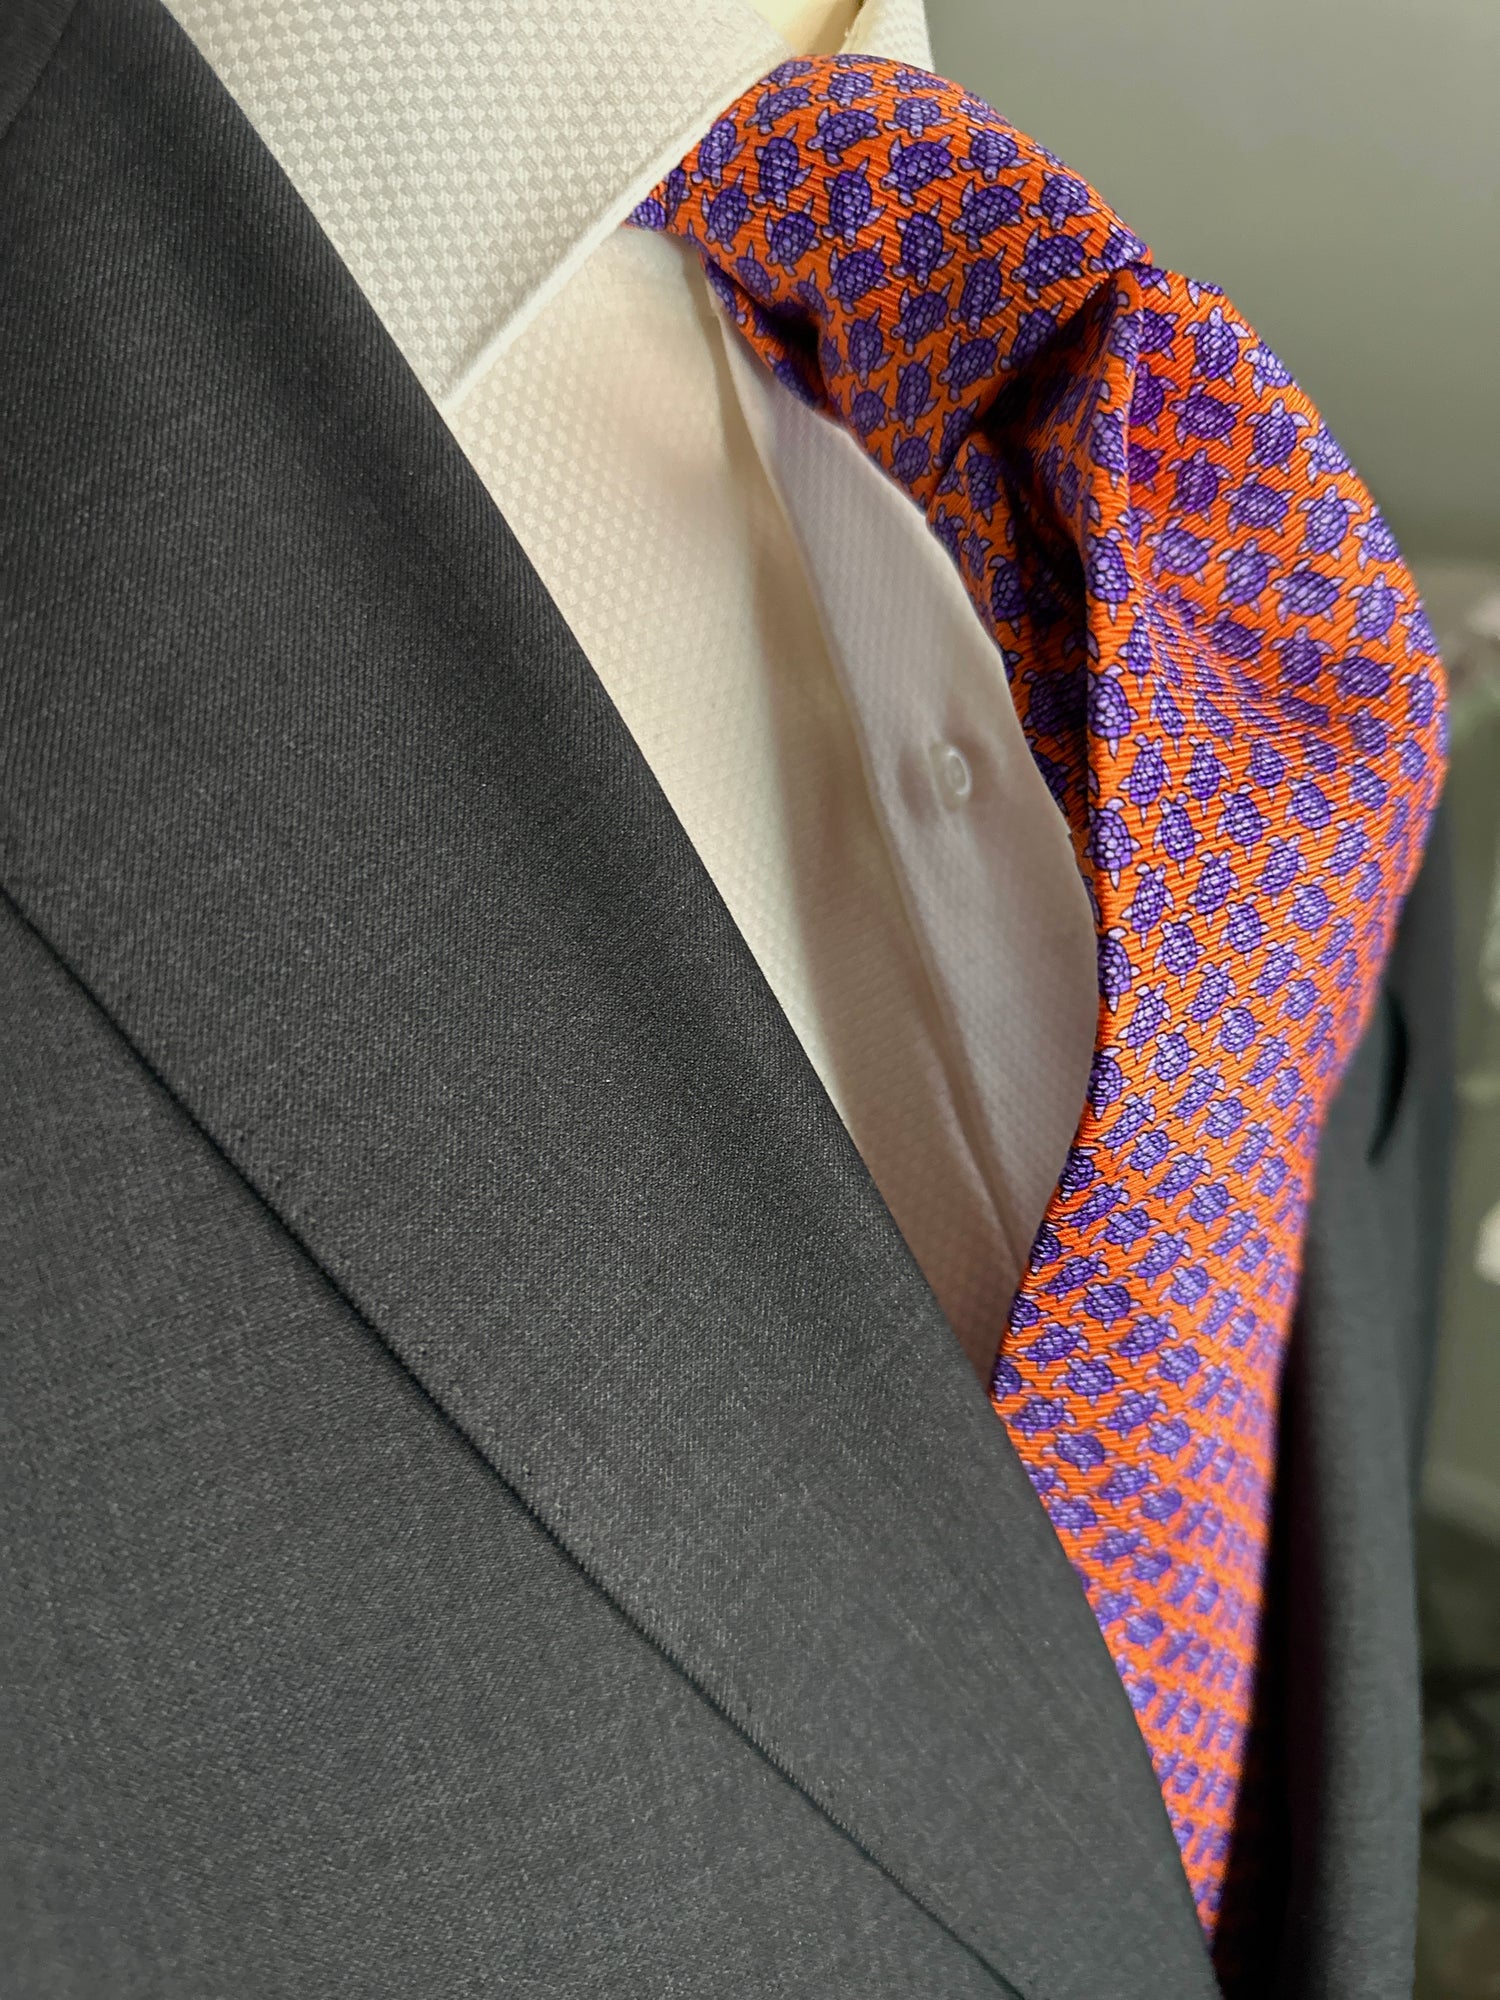 A tie with turtles, what could be better? You don't see turtles? This beautiful geometric pattern is made of closely bunched turtles in purple against an orange background. What is so great about this tie is that from afar this necktie is a neat pattern, but as you get closer it can be seen there are small turtles together. Hermes style. 